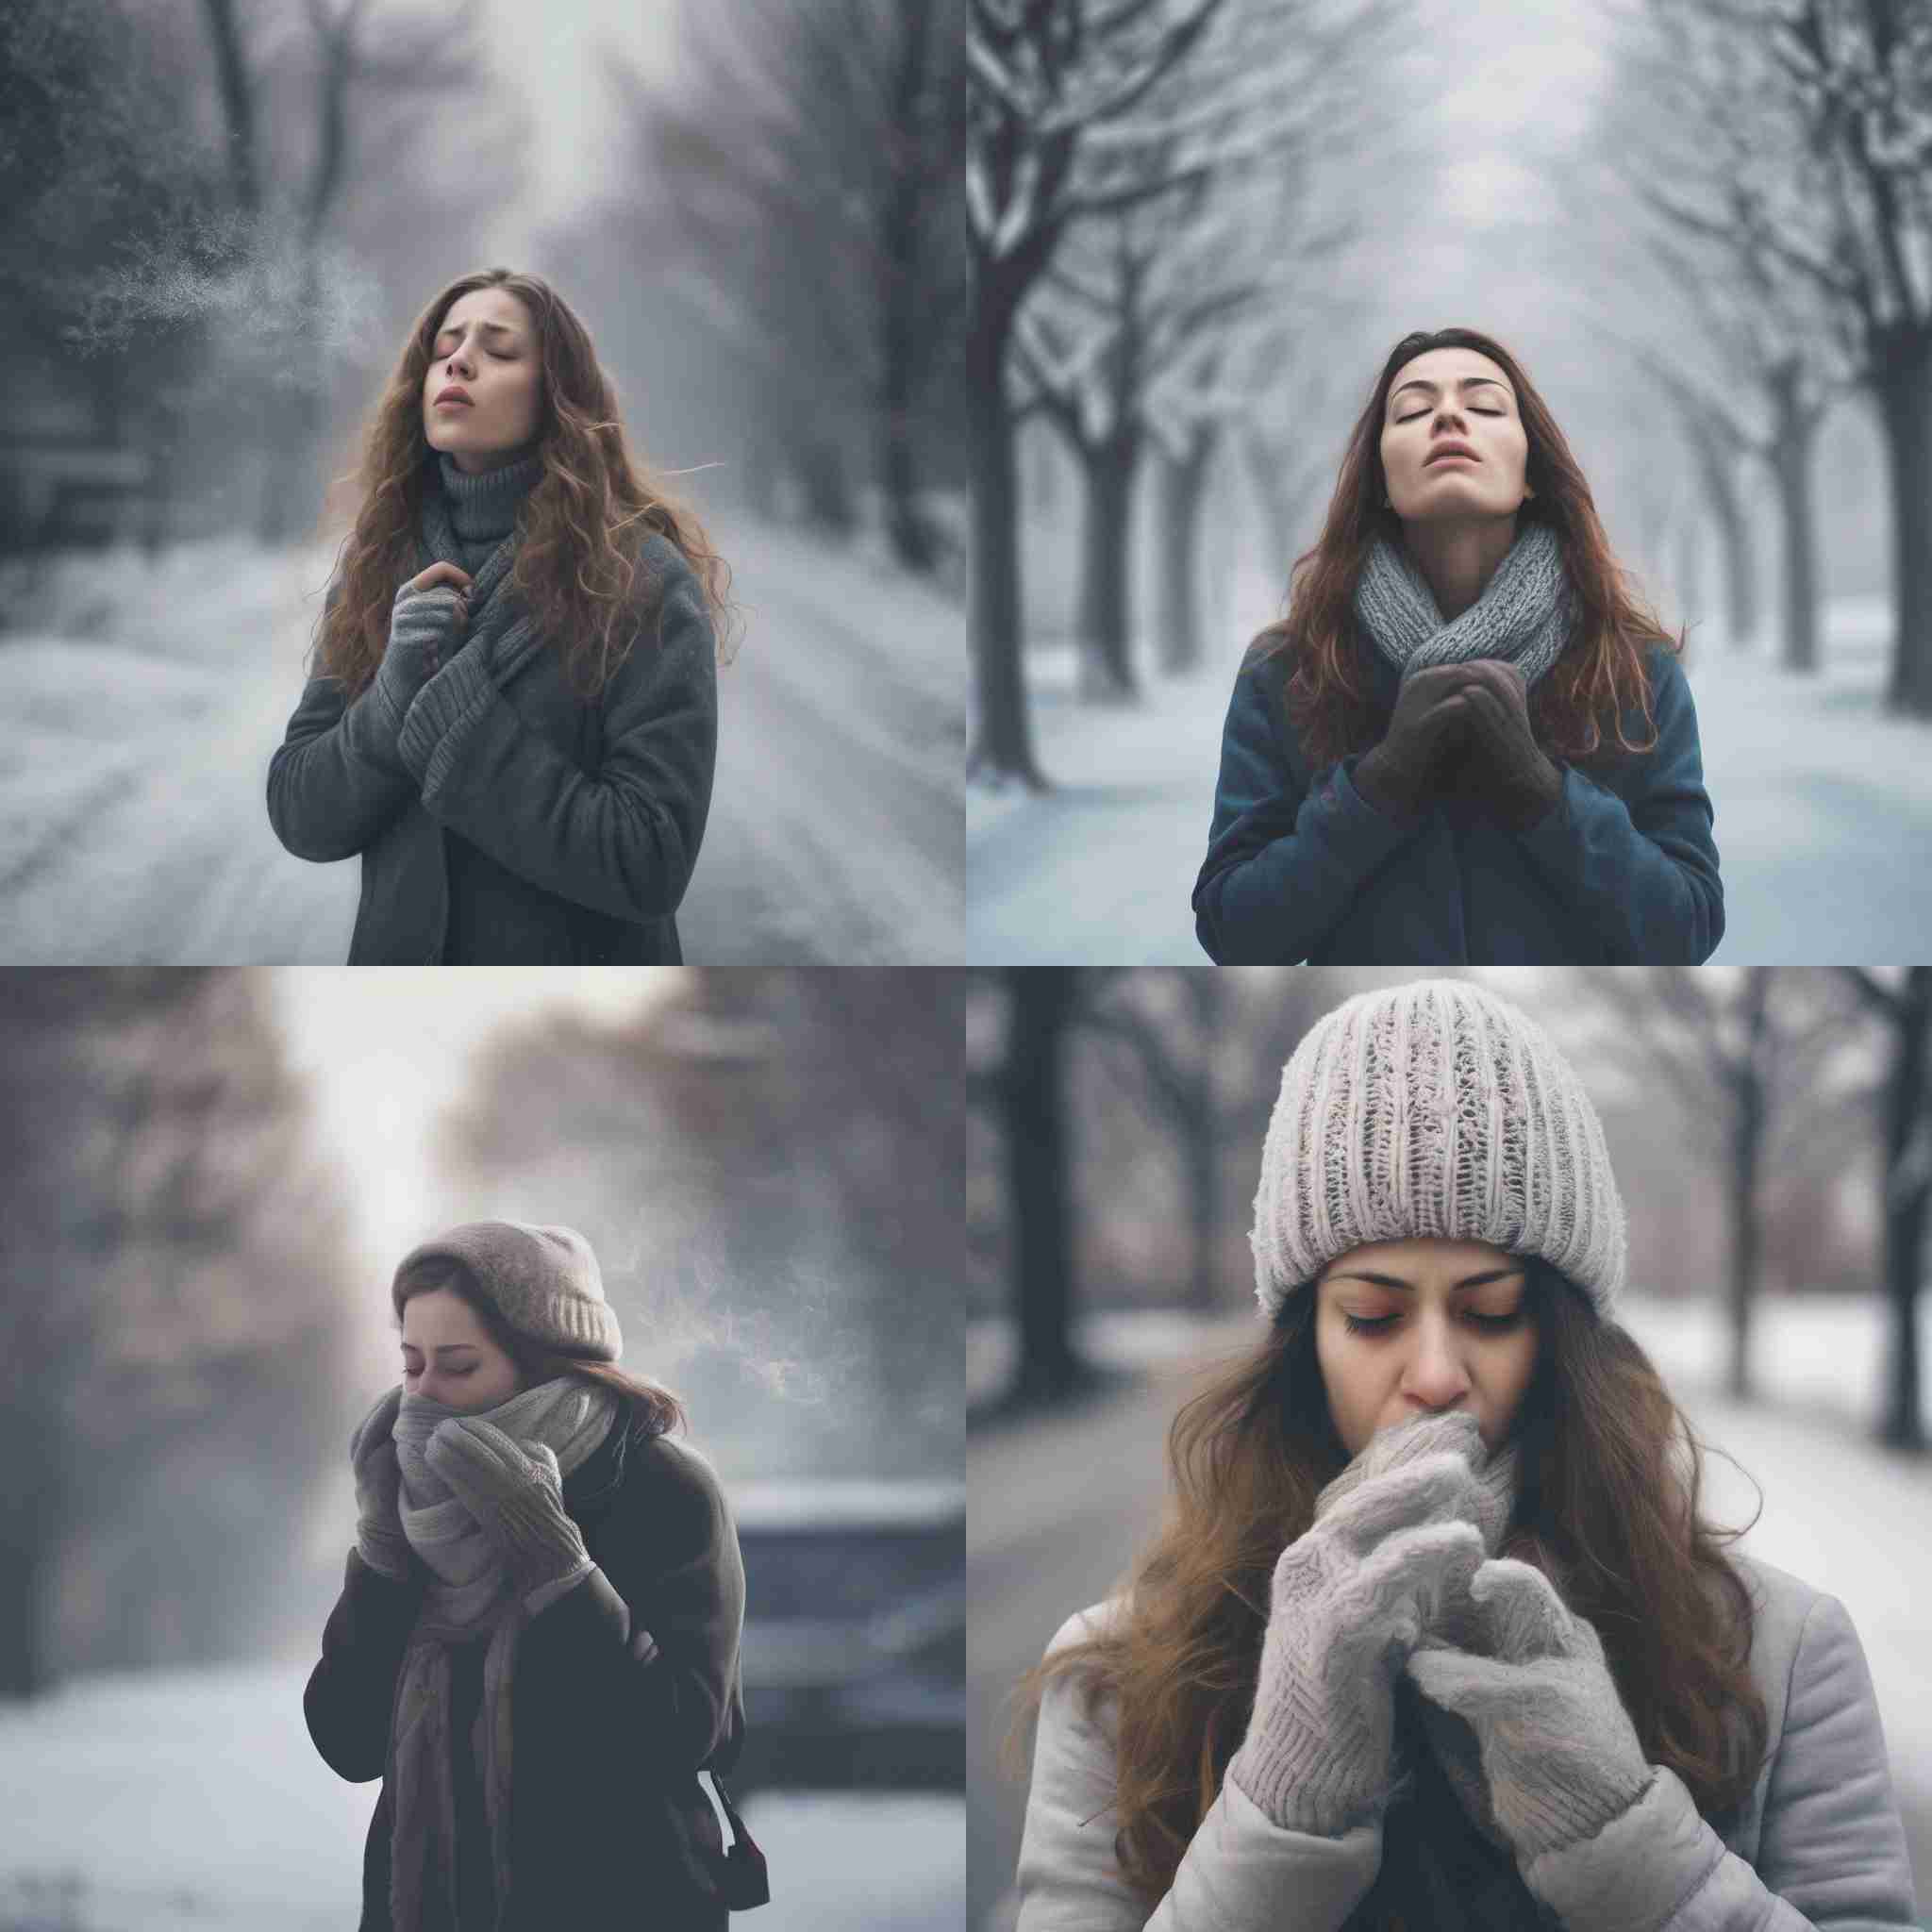 A person exhaling on a freezing winter day